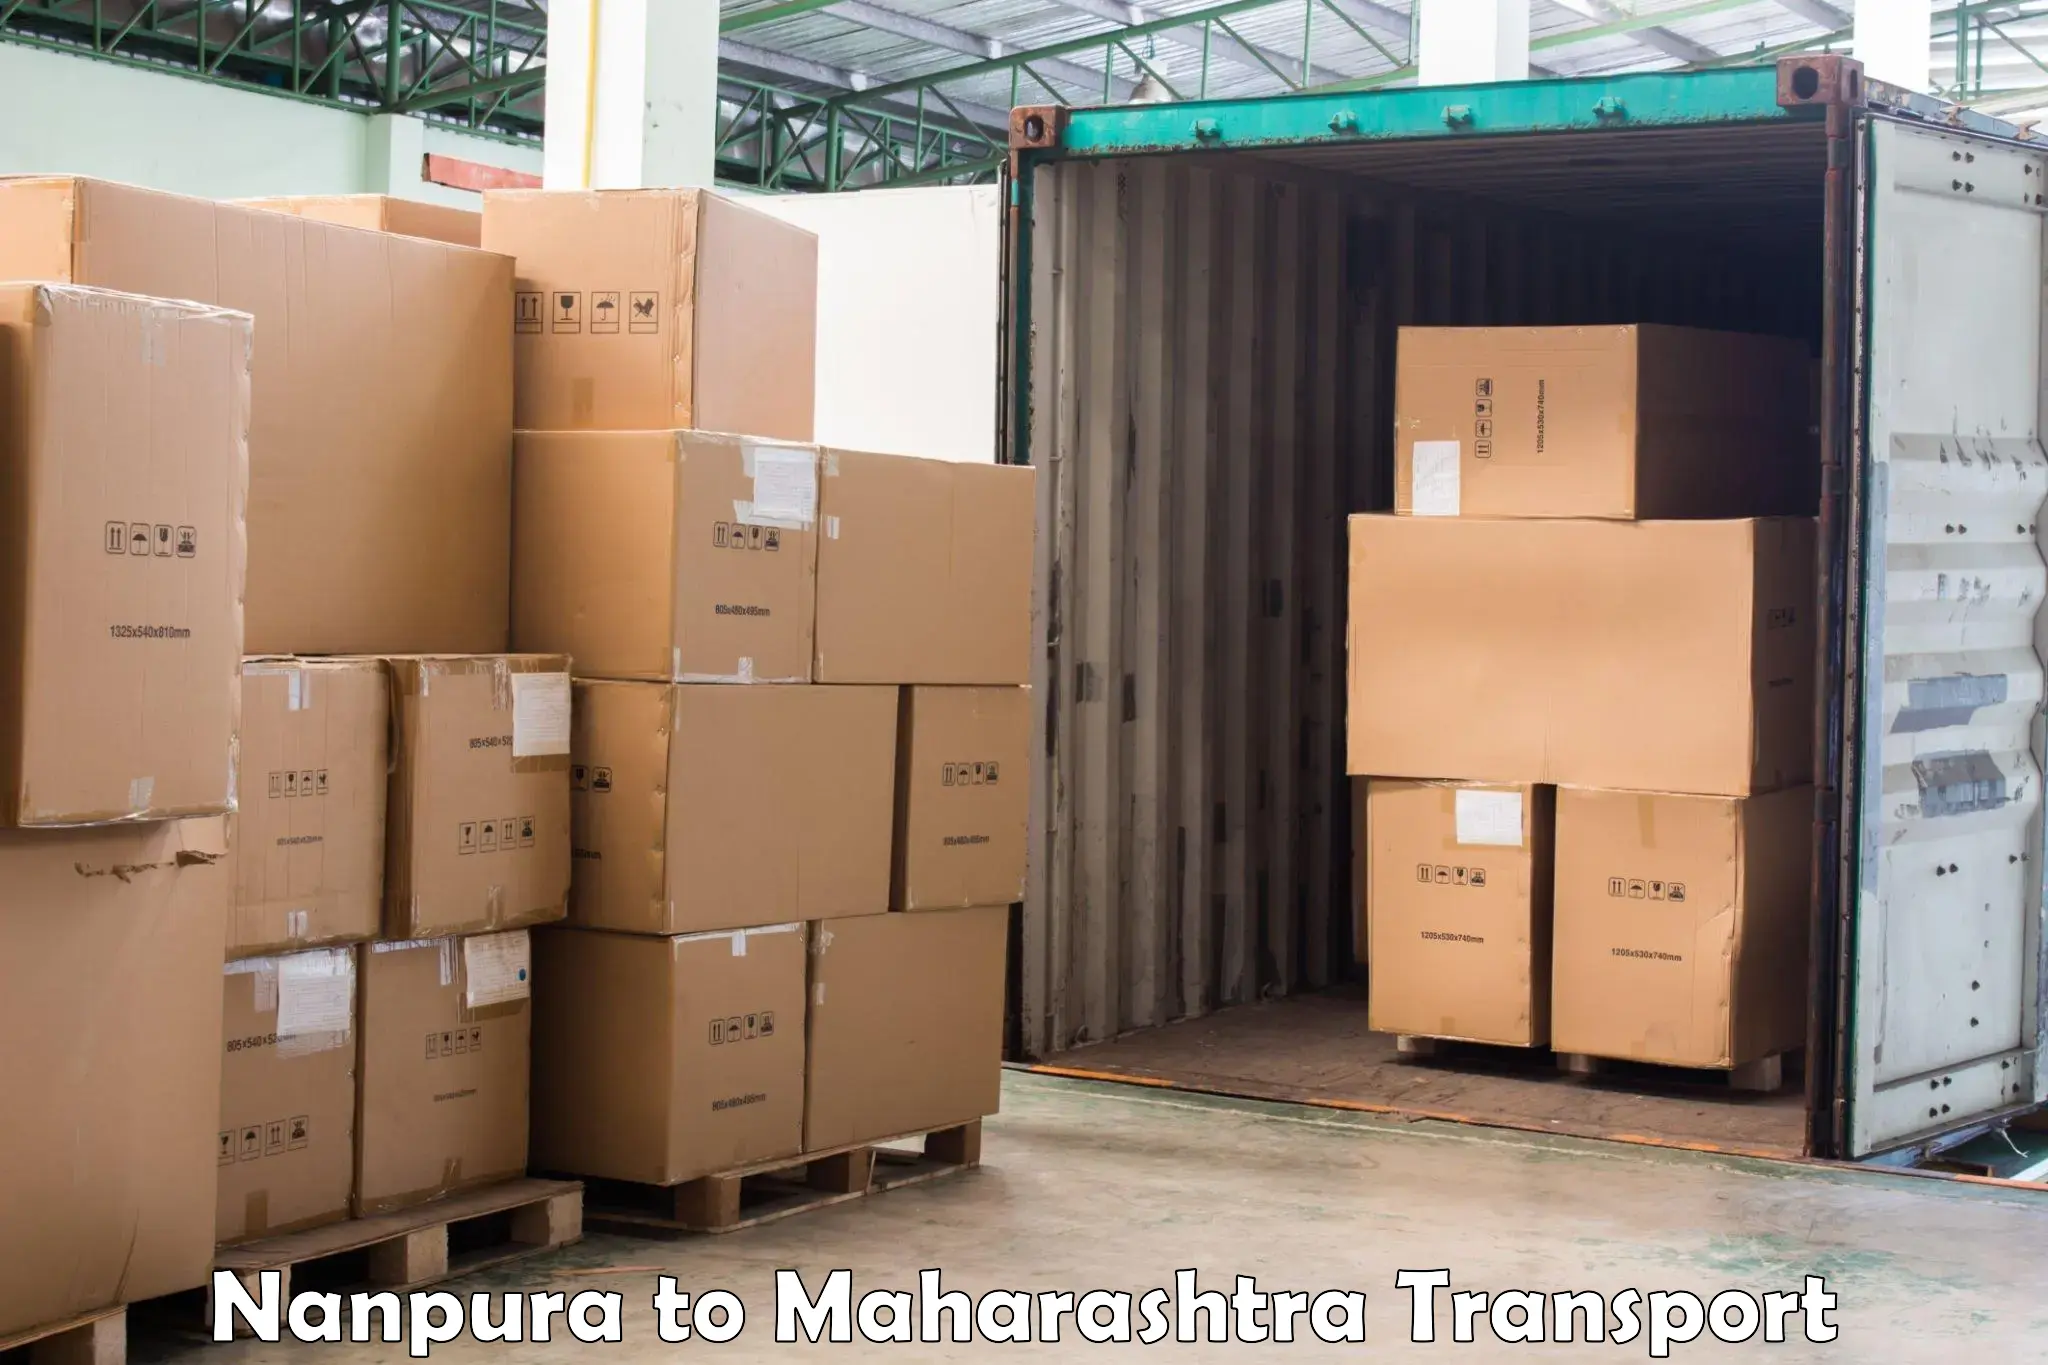 Truck transport companies in India Nanpura to Supe